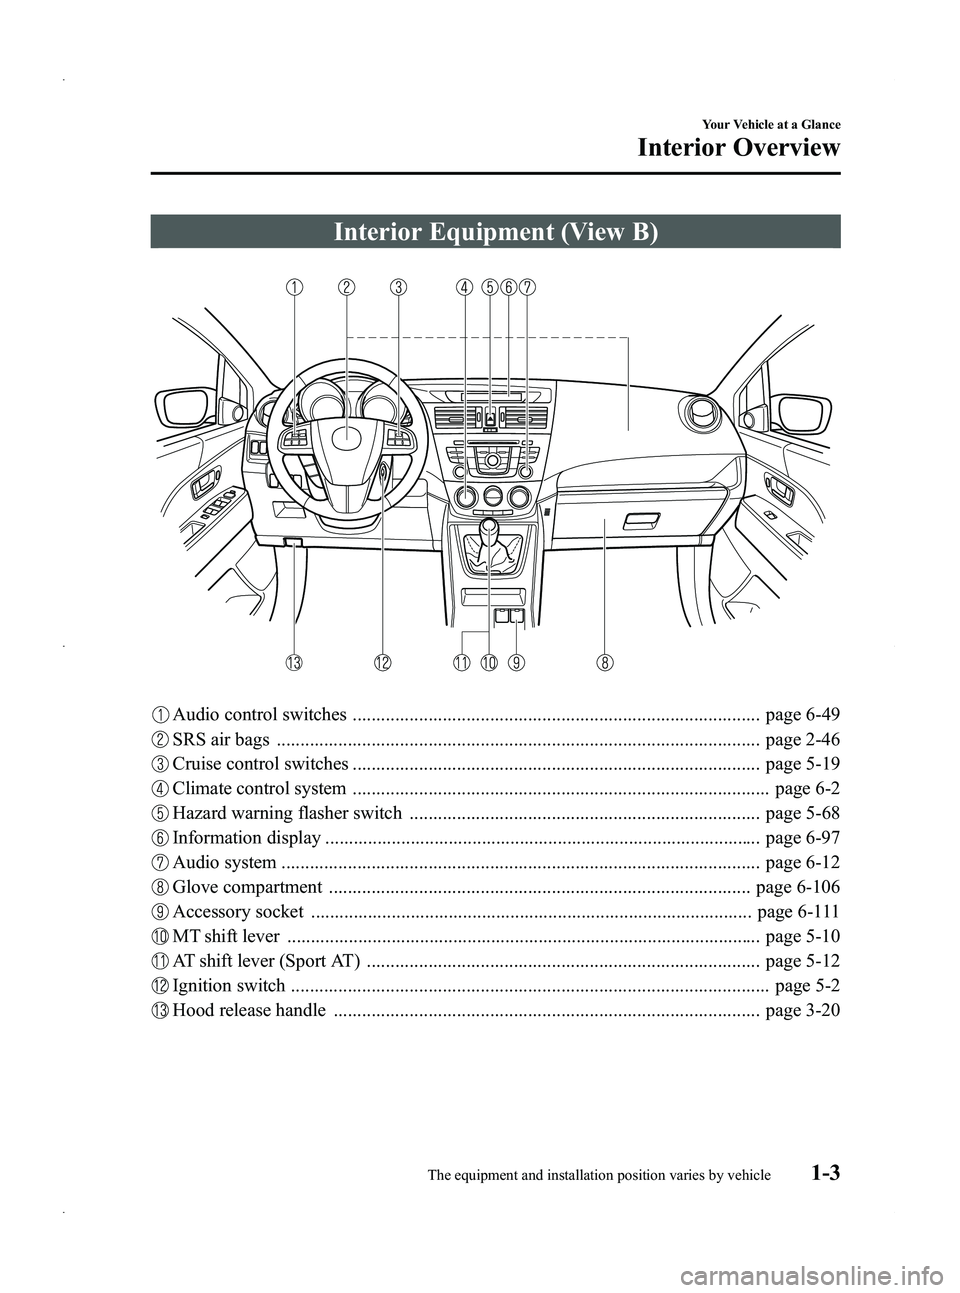 MAZDA MODEL 5 2013  Owners Manual Black plate (9,1)
Interior Equipment (View B)
Audio control switches ...................................................................................... page 6-49
SRS air bags .....................